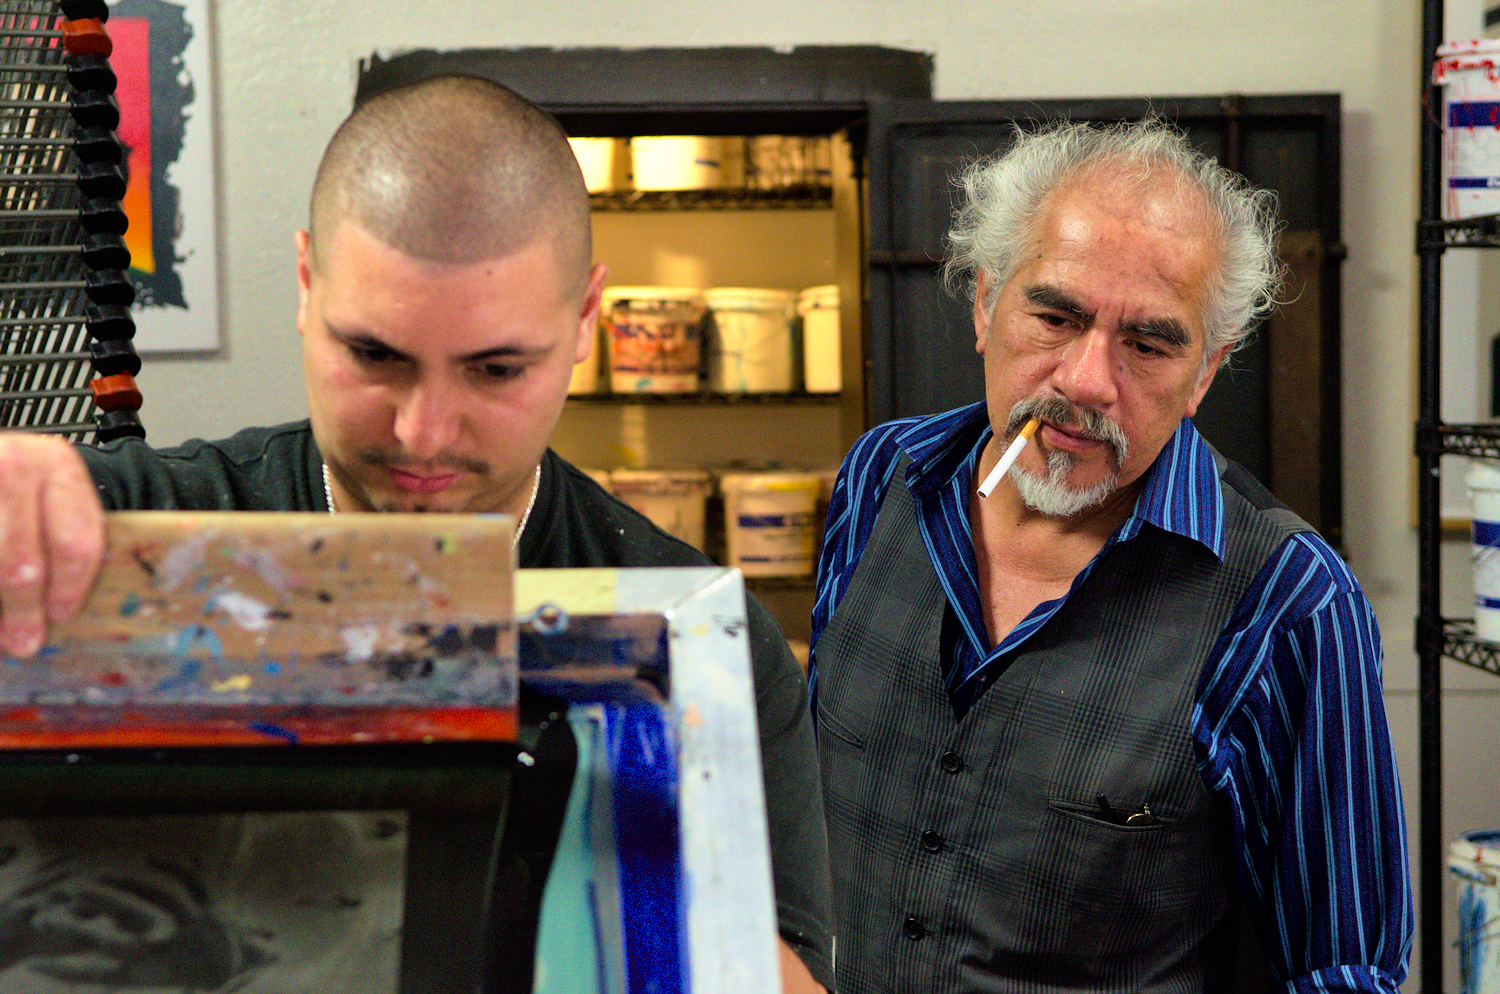  Richard Duardo (right), printmaster and founder of the renowned Modern Multiples Editions. His studio is a major established actor, working with local and international contemporary artists such as the street artists Shepard Fairey. 